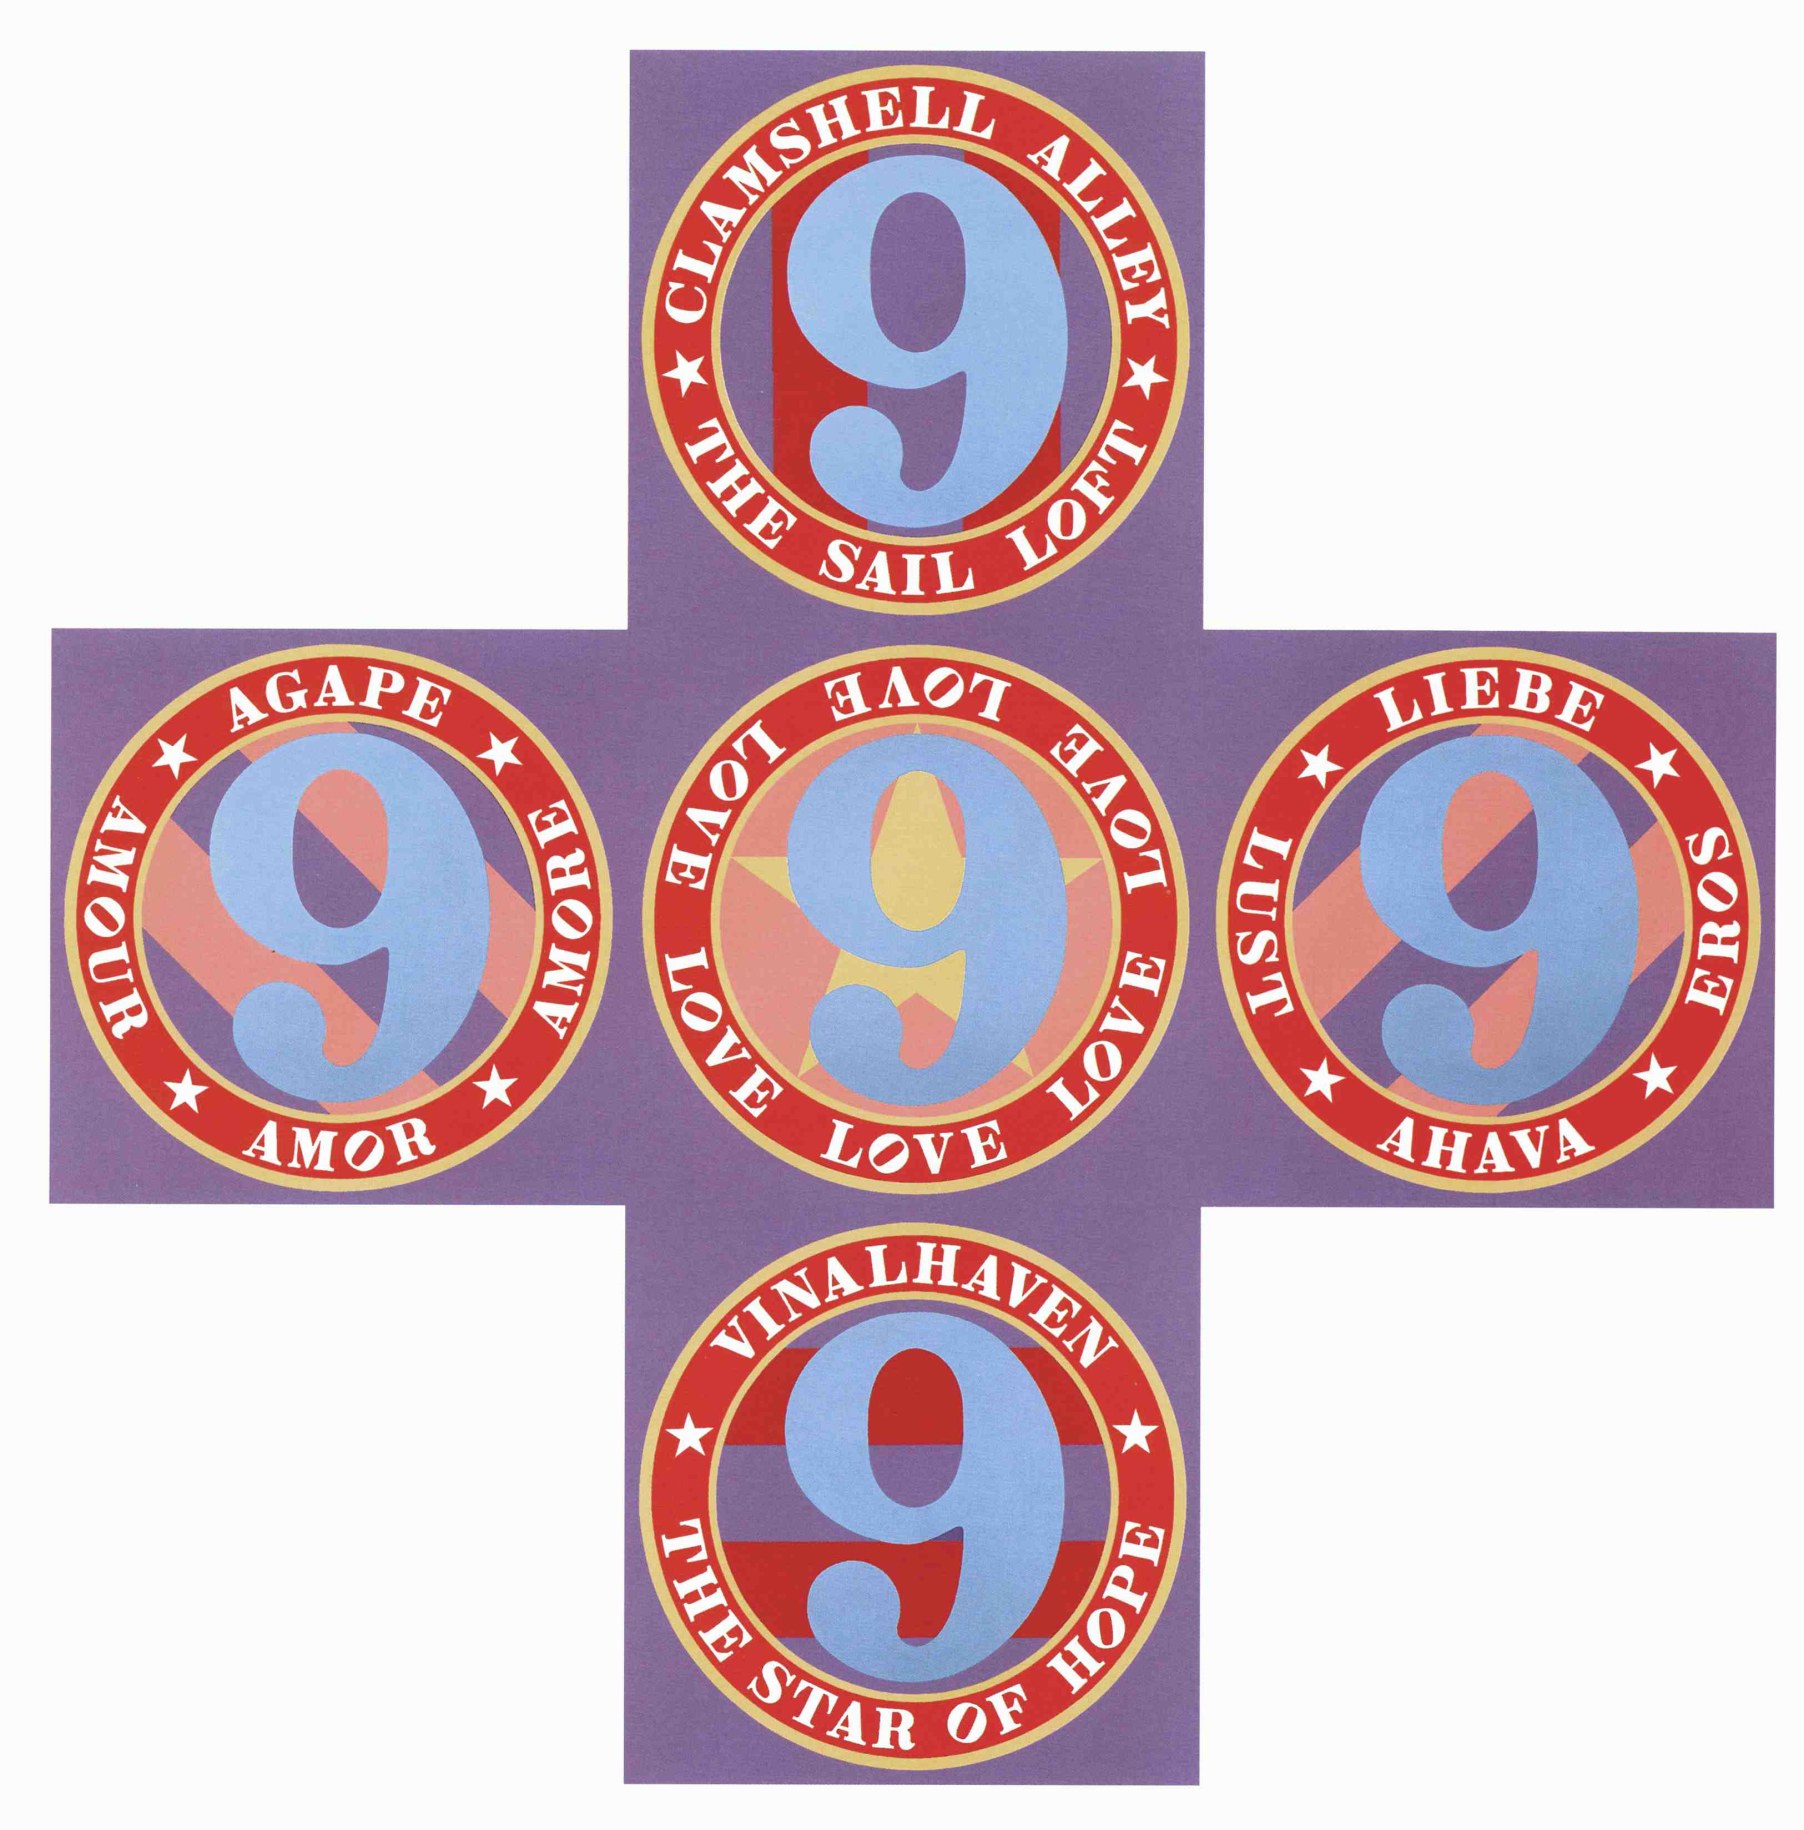 The Ninth Love Cross is a cross shaped painting comprised of five panels and measuring 108 by 108 inches overall. Each panel is square shaped with a light purple ground and a circle containing a light blue numeral nine with a yellow outlined red ring containing text. The background of the circle in the central panel is pink with a yellow star, and the text in the ring is Love repeated six times. The background of the top panel's circle is vertical light purple and red stripes, and the text reads &quot;Clamshell Alley The Sail Loft.&quot; The background of the right panel's circle is diagonal light purple and light pink stripes, and the text in the ring reads &quot;Liebe Eros Ahava Lust.&quot; The background of the bottom panel's circle is horizontal light purple and red stripes, and the ring's text reads &quot;Vinalhaven The Start of Hope.&quot; The background of the left panel's circle is diagonal light pink and light purple stripes, and the text in the ring reads &quot;Agape Amore Amor and Amour.&quot;